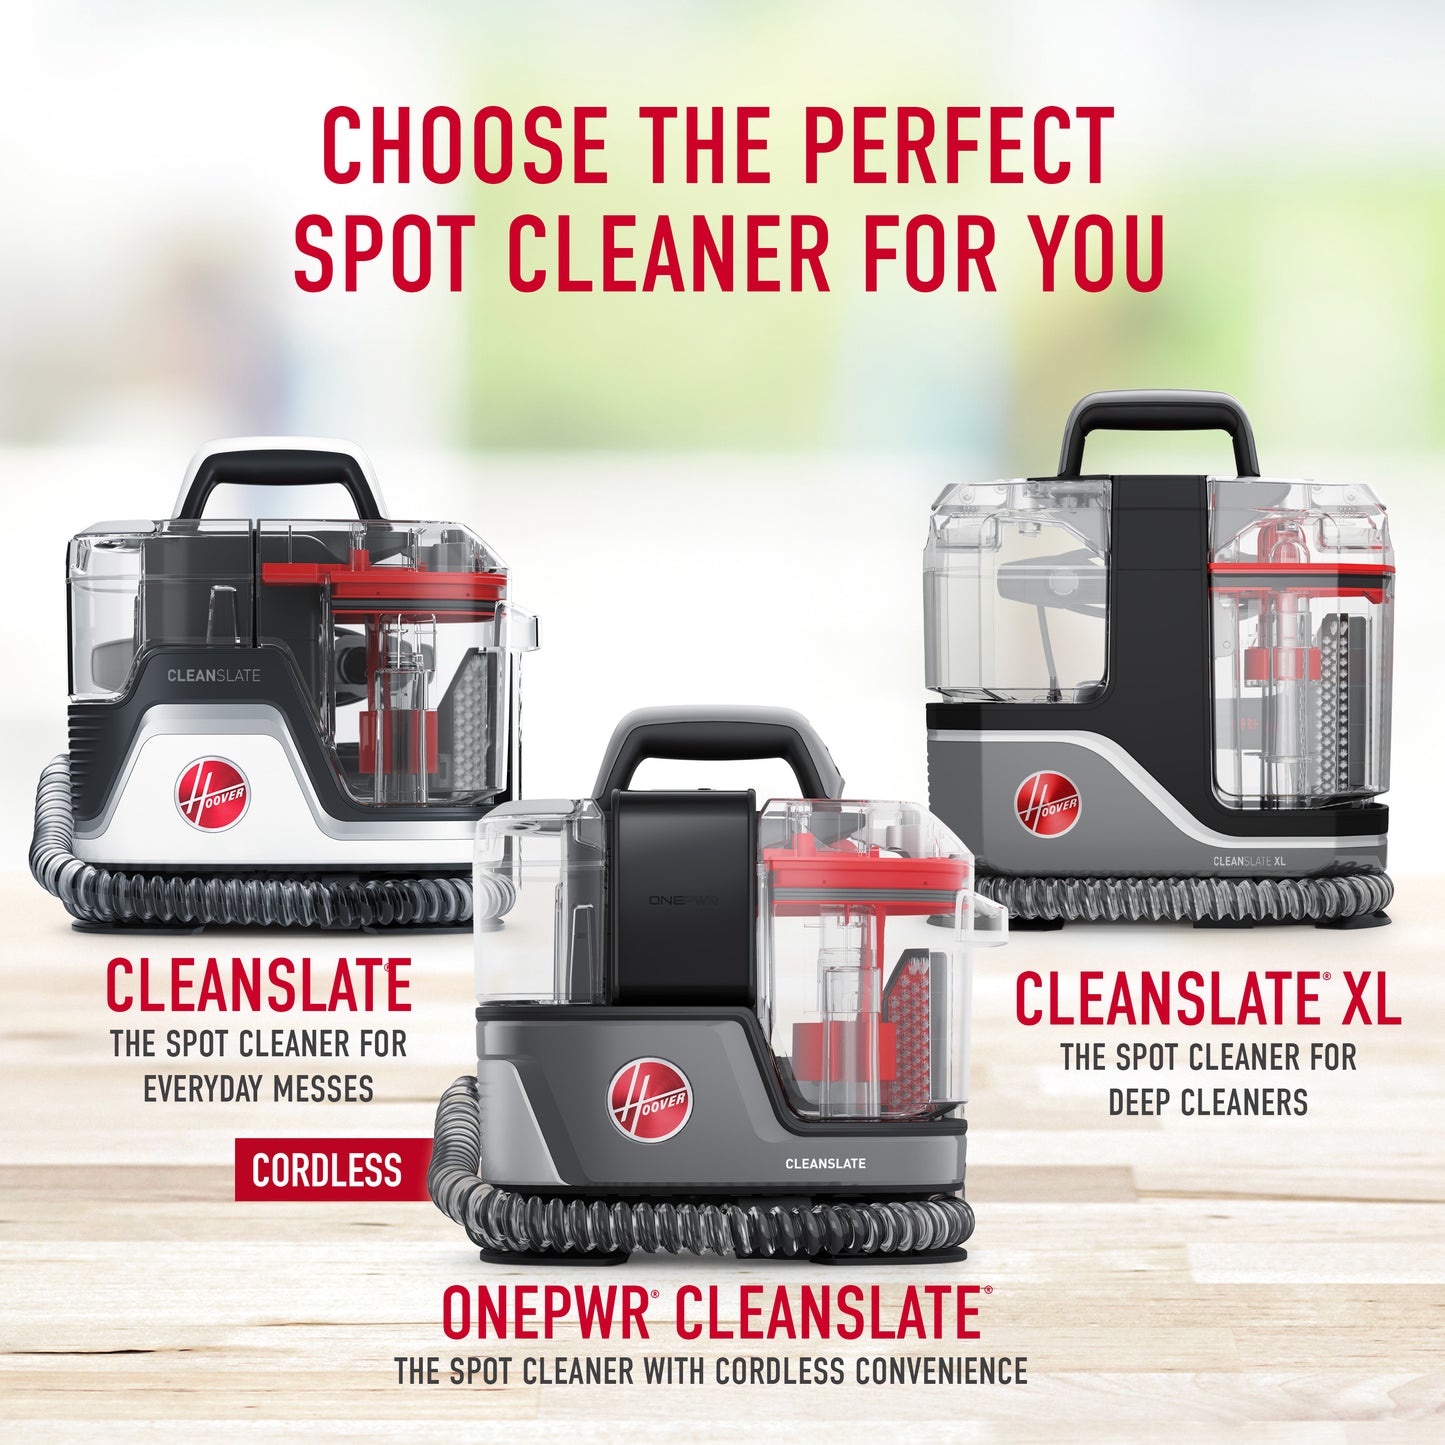 Comparison of 3 Hoover spot cleaners.  The cleanslate works best for everyday messes, ONEPWR cleanslate is the spot cleaner with cordless convenience, and the cleanslate xl is best for deep cleaning  